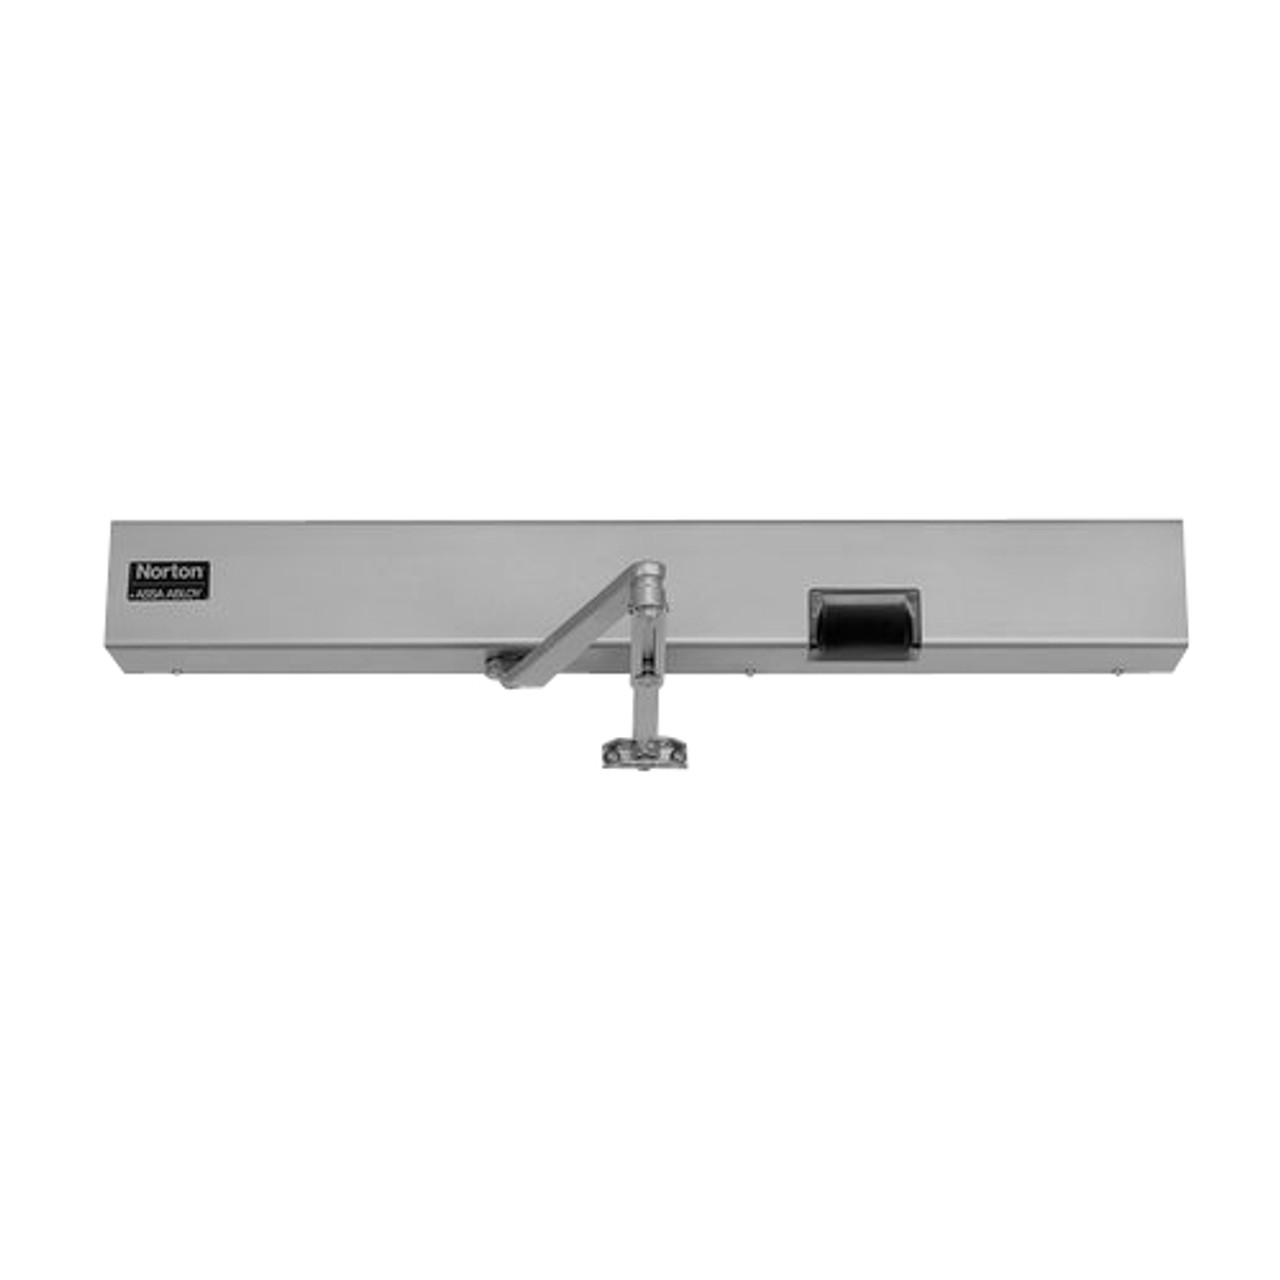 7135SZ-RH-120VAC-689 Norton 7100SZ Series Safe Zone Multi-Point Closer/Holder with Motion Sensor and Push Side Double Lever 13-1/2 inch Main Arm in Aluminum Finish